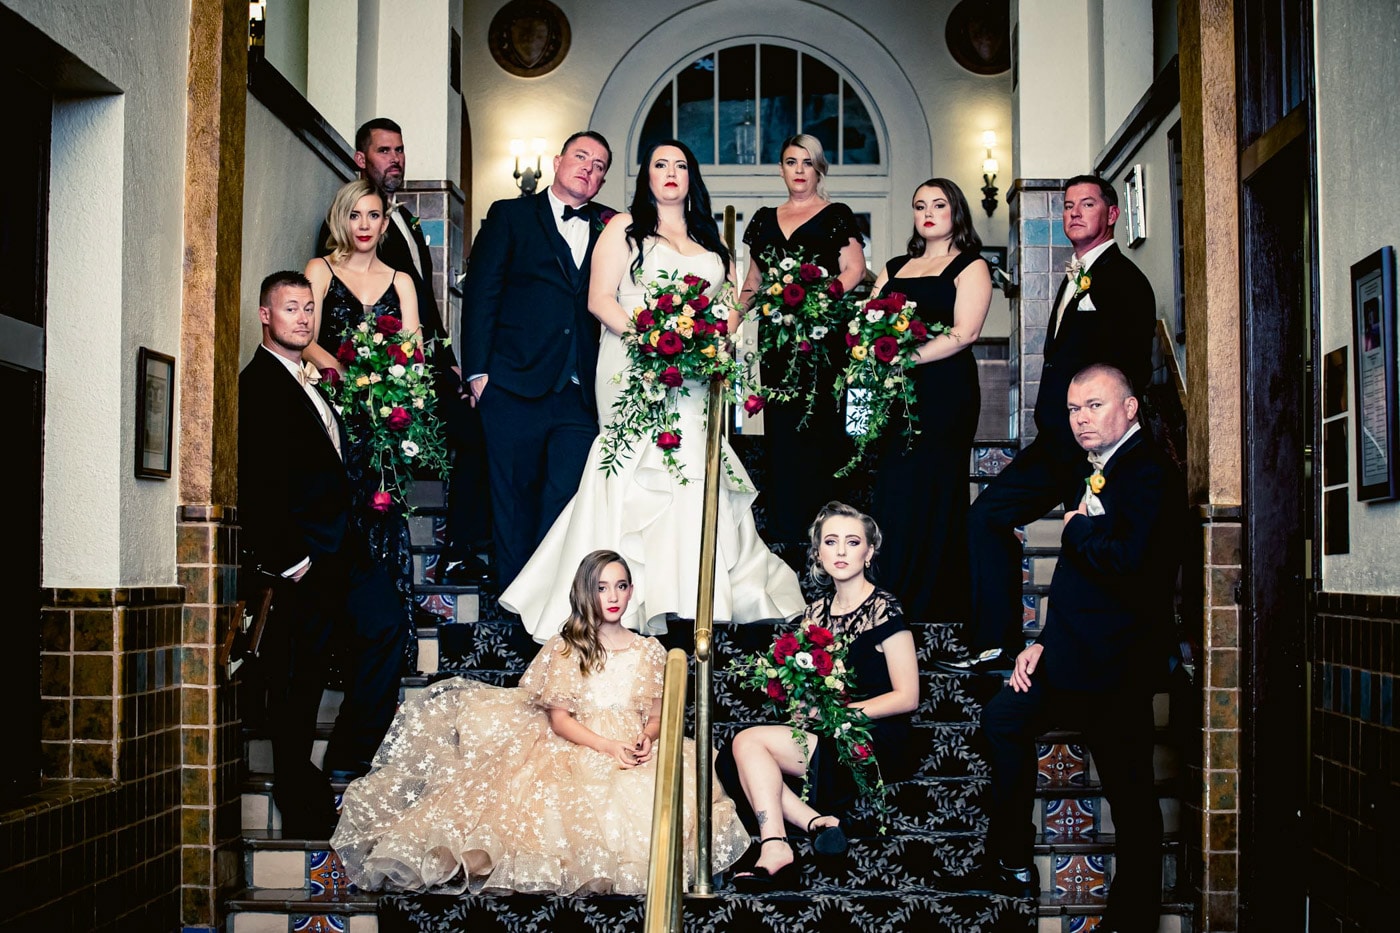 Bride and groom poses on stairs with wedding party